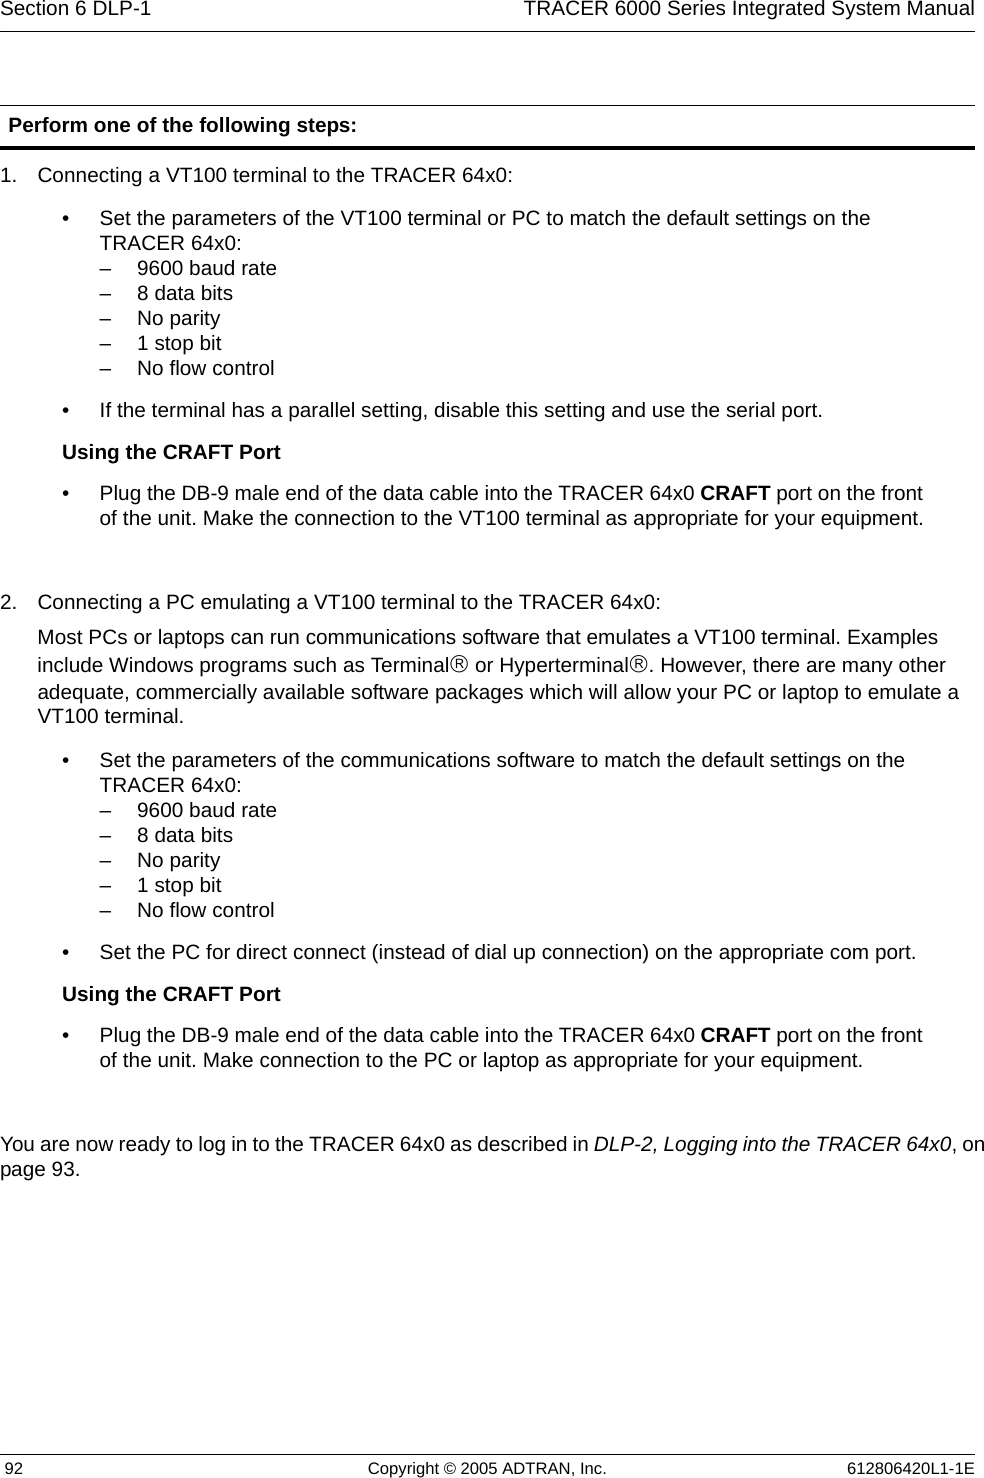 Section 6 DLP-1  TRACER 6000 Series Integrated System Manual 92 Copyright © 2005 ADTRAN, Inc. 612806420L1-1E1. Connecting a VT100 terminal to the TRACER 64x0:2. Connecting a PC emulating a VT100 terminal to the TRACER 64x0:Most PCs or laptops can run communications software that emulates a VT100 terminal. Examples include Windows programs such as Terminal® or Hyperterminal®. However, there are many other adequate, commercially available software packages which will allow your PC or laptop to emulate a VT100 terminal.You are now ready to log in to the TRACER 64x0 as described in DLP-2, Logging into the TRACER 64x0, on page 93.Perform one of the following steps:• Set the parameters of the VT100 terminal or PC to match the default settings on the TRACER 64x0:– 9600 baud rate– 8 data bits– No parity– 1 stop bit– No flow control• If the terminal has a parallel setting, disable this setting and use the serial port. Using the CRAFT Port• Plug the DB-9 male end of the data cable into the TRACER 64x0 CRAFT port on the front of the unit. Make the connection to the VT100 terminal as appropriate for your equipment.• Set the parameters of the communications software to match the default settings on the TRACER 64x0:– 9600 baud rate– 8 data bits– No parity– 1 stop bit– No flow control• Set the PC for direct connect (instead of dial up connection) on the appropriate com port.Using the CRAFT Port• Plug the DB-9 male end of the data cable into the TRACER 64x0 CRAFT port on the front of the unit. Make connection to the PC or laptop as appropriate for your equipment.